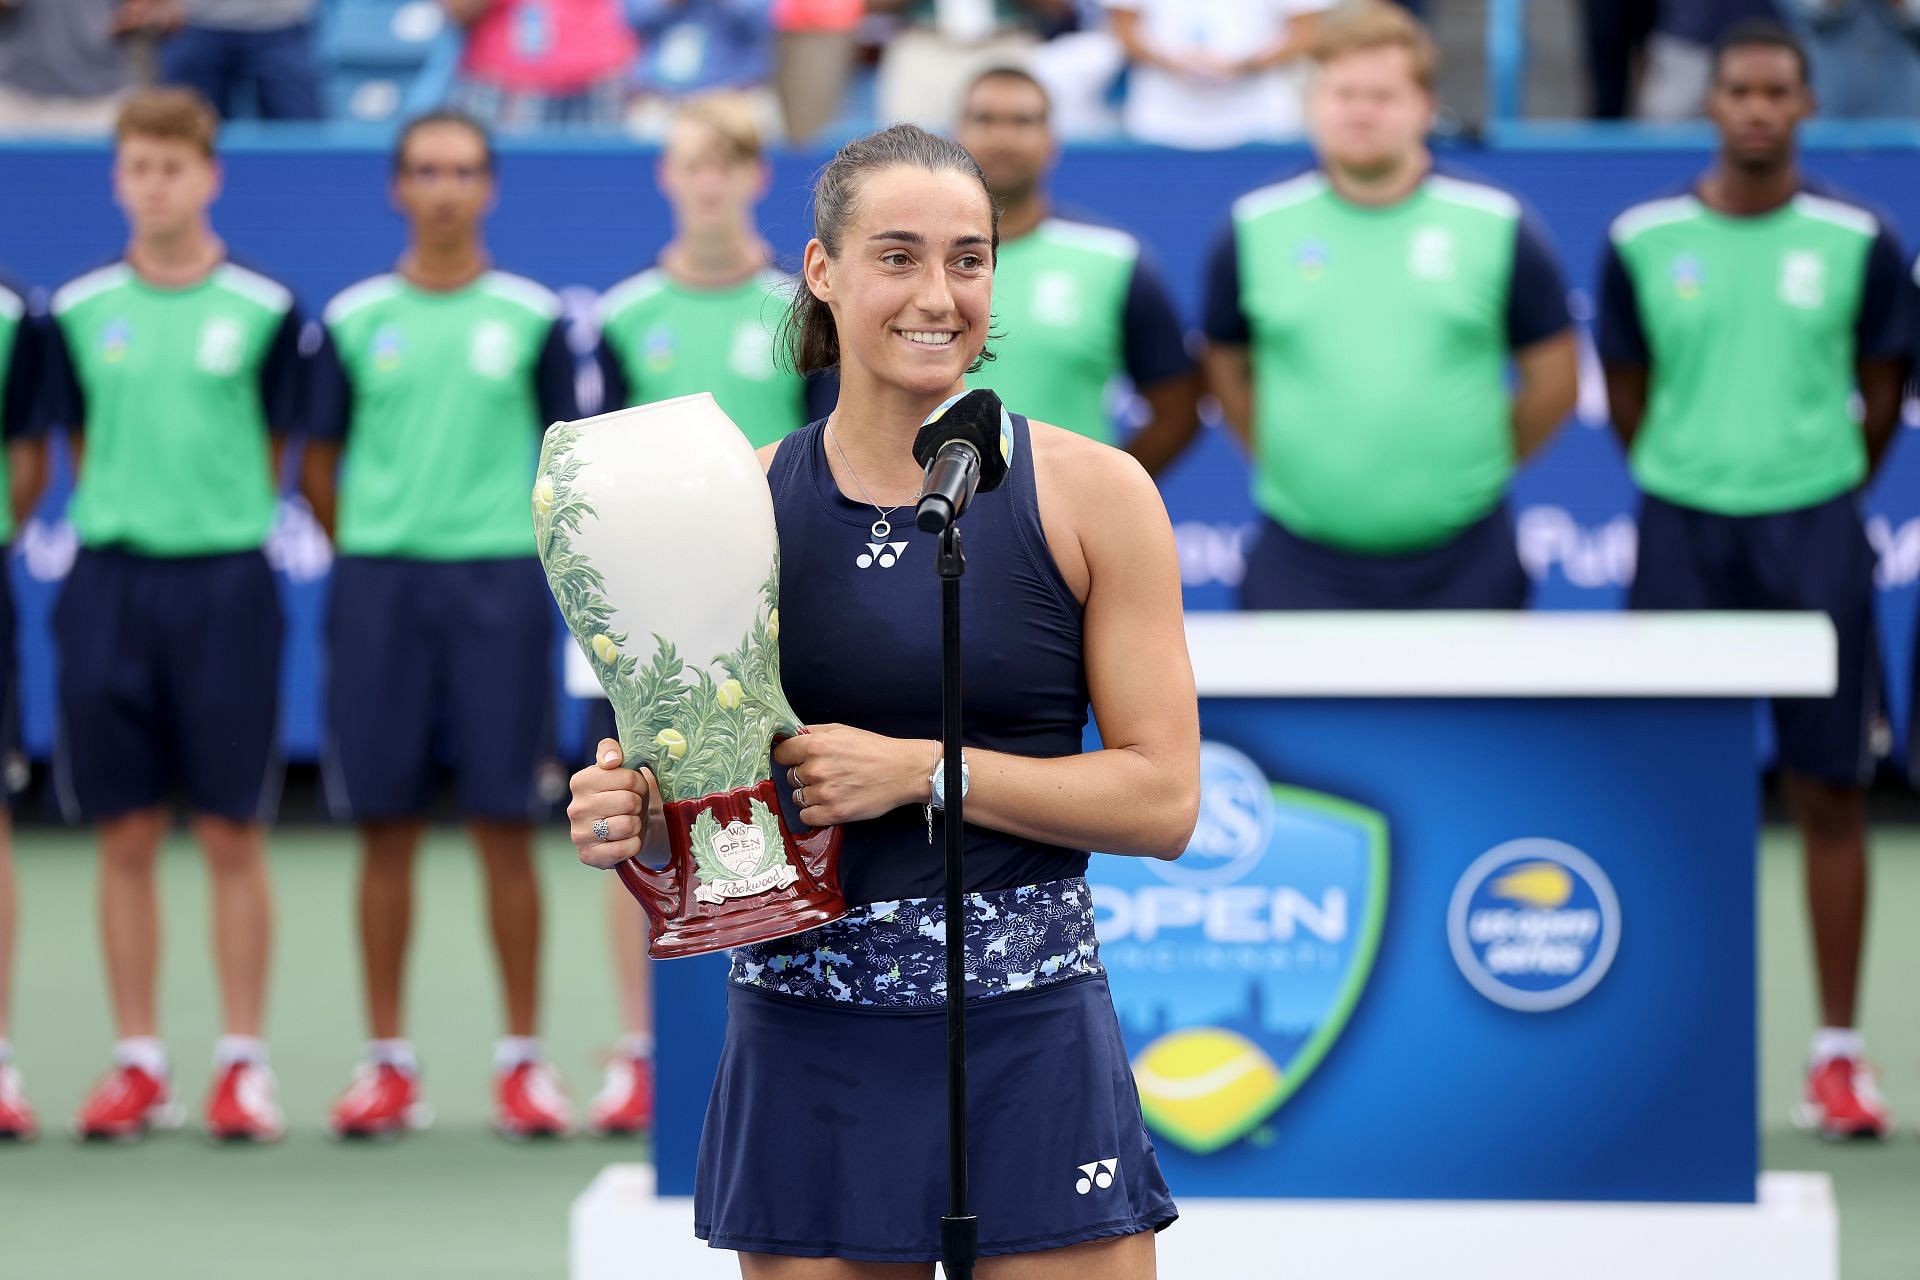 Caroline Garcia at the 2022 Western &amp; Southern Open.